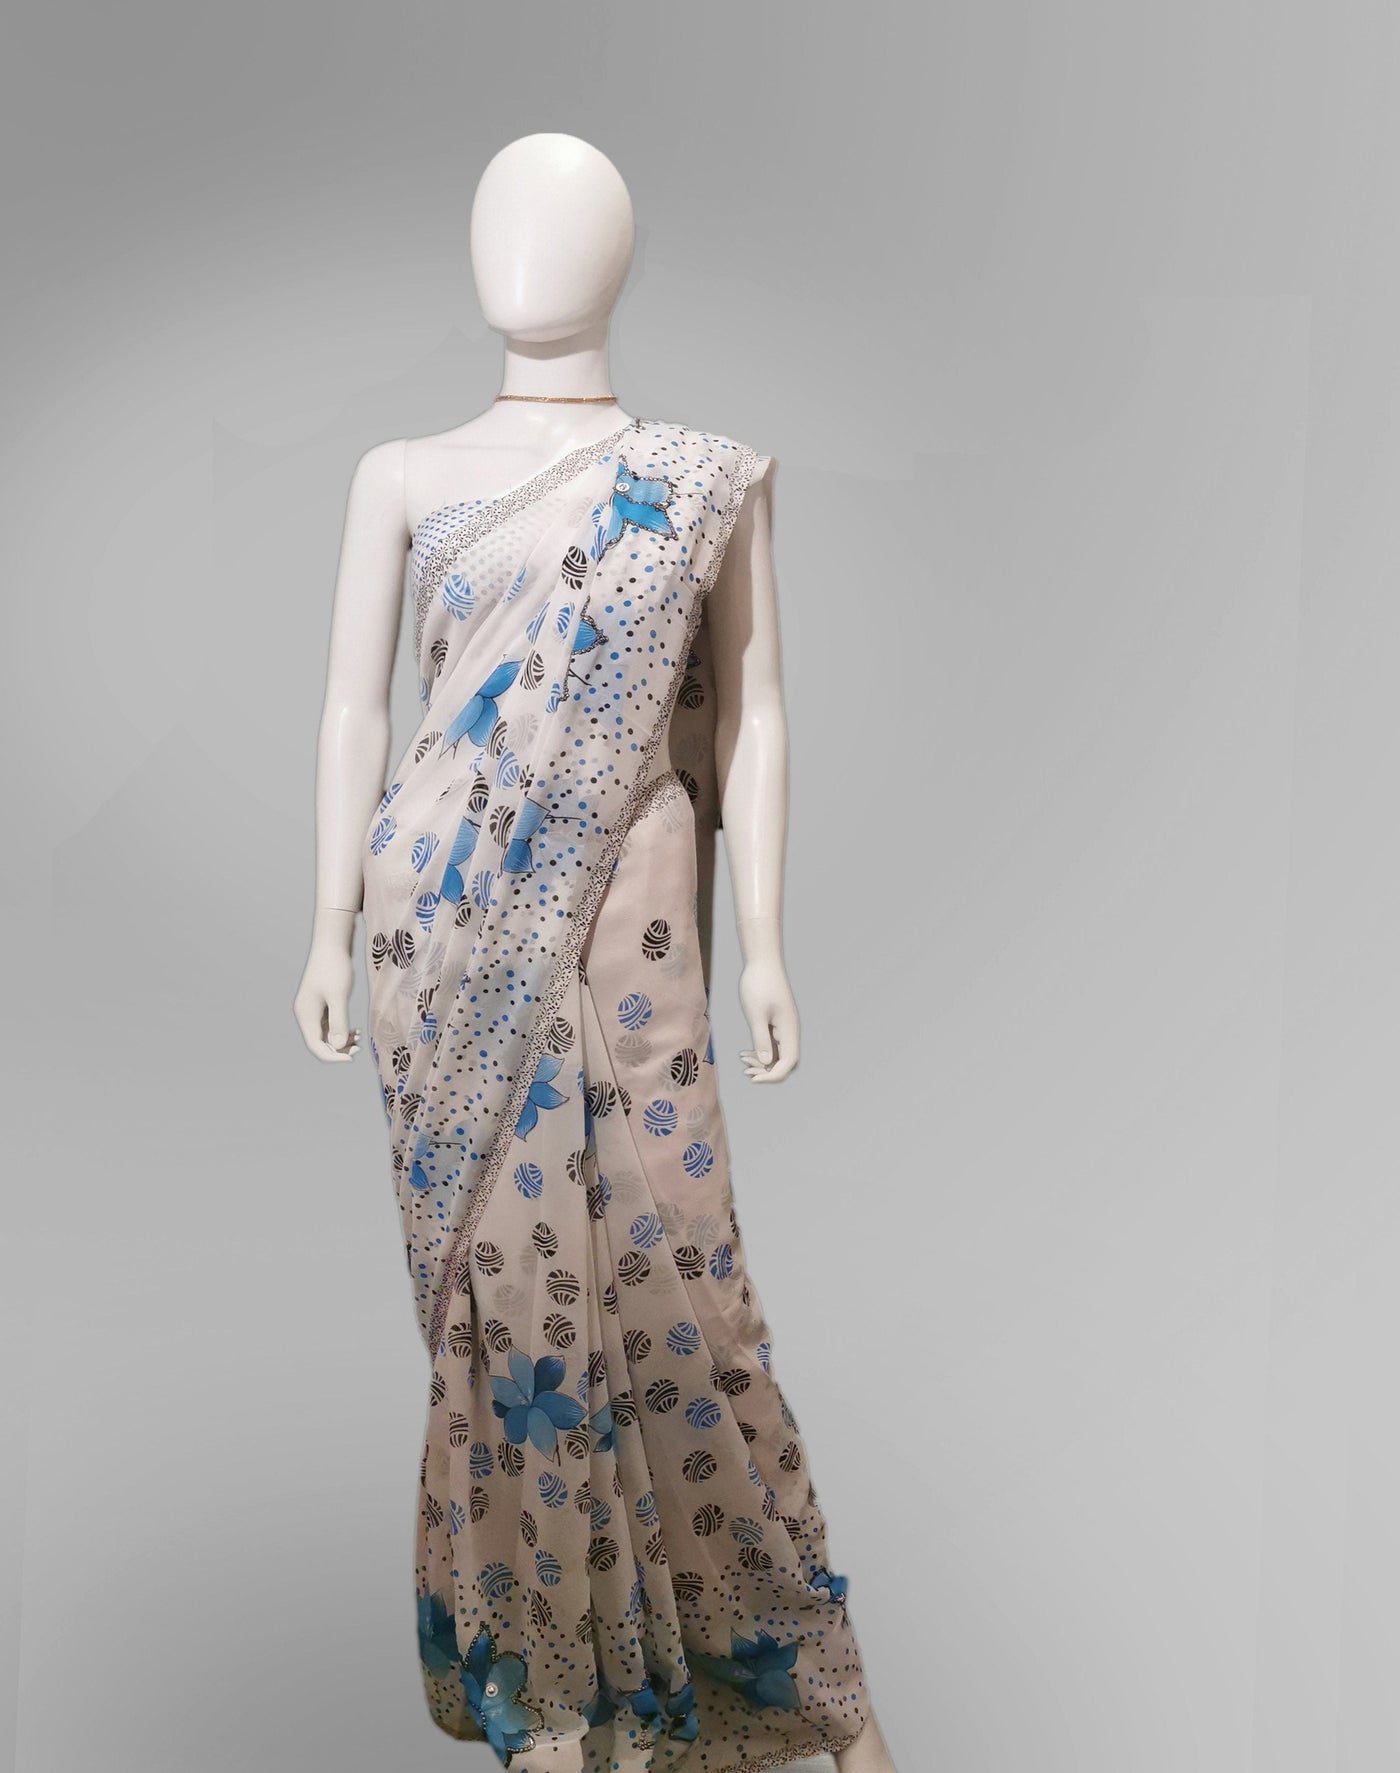 Saree in White and Blue Floral Featured with Sequin Work Indian Clothing in Denver, CO, Aurora, CO, Boulder, CO, Fort Collins, CO, Colorado Springs, CO, Parker, CO, Highlands Ranch, CO, Cherry Creek, CO, Centennial, CO, and Longmont, CO. NATIONWIDE SHIPPING USA- India Fashion X